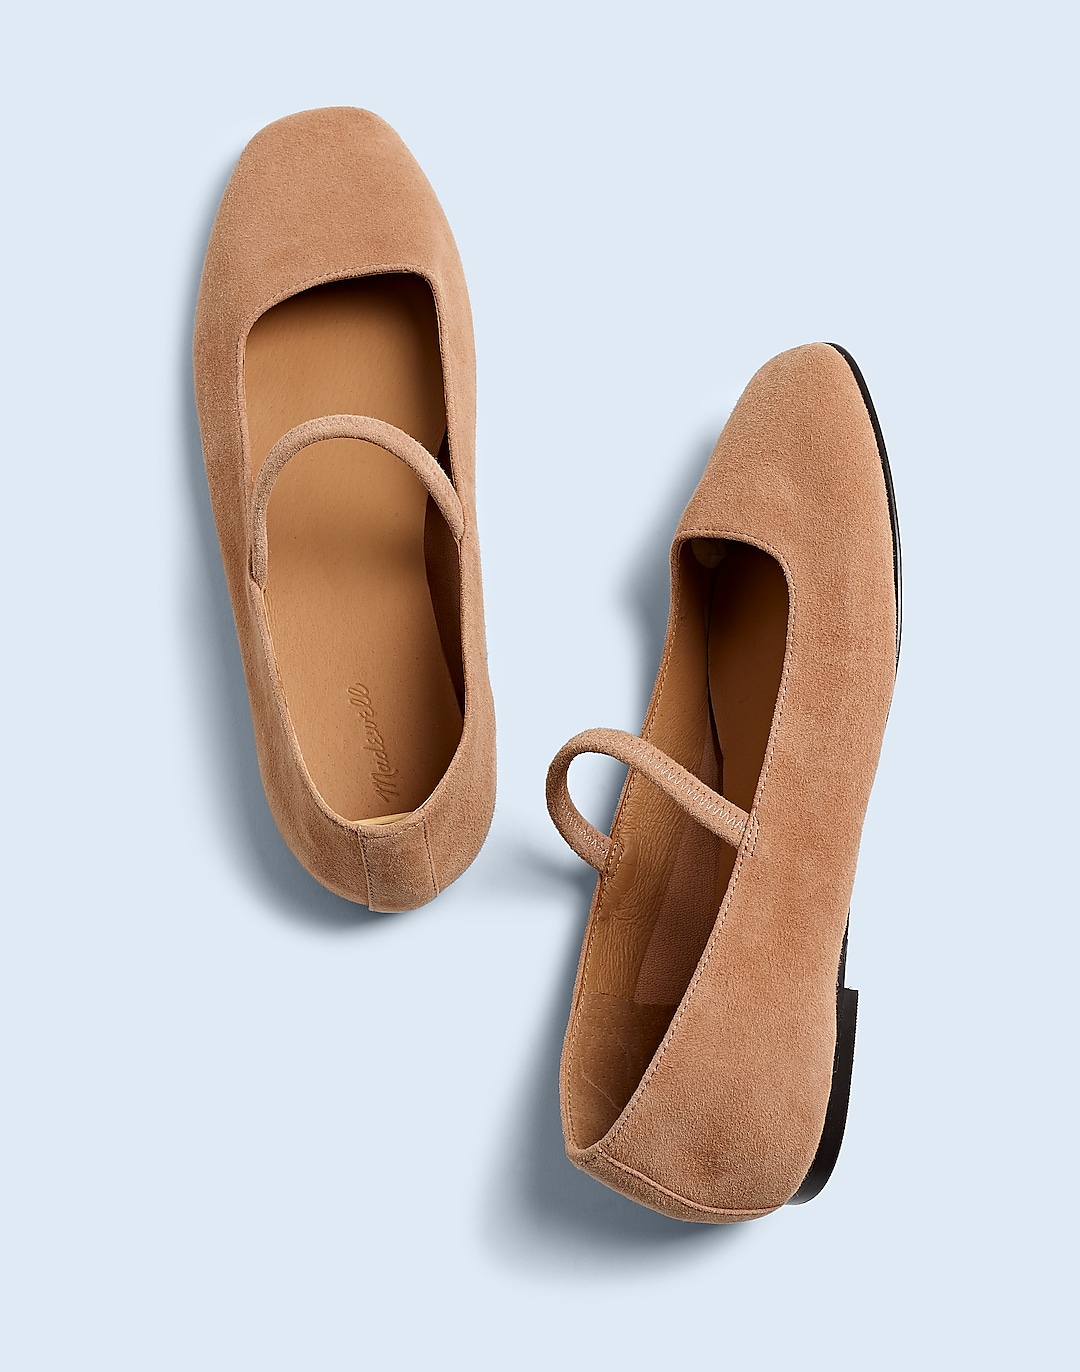 The Greta Ballet Flat in Suede | Madewell